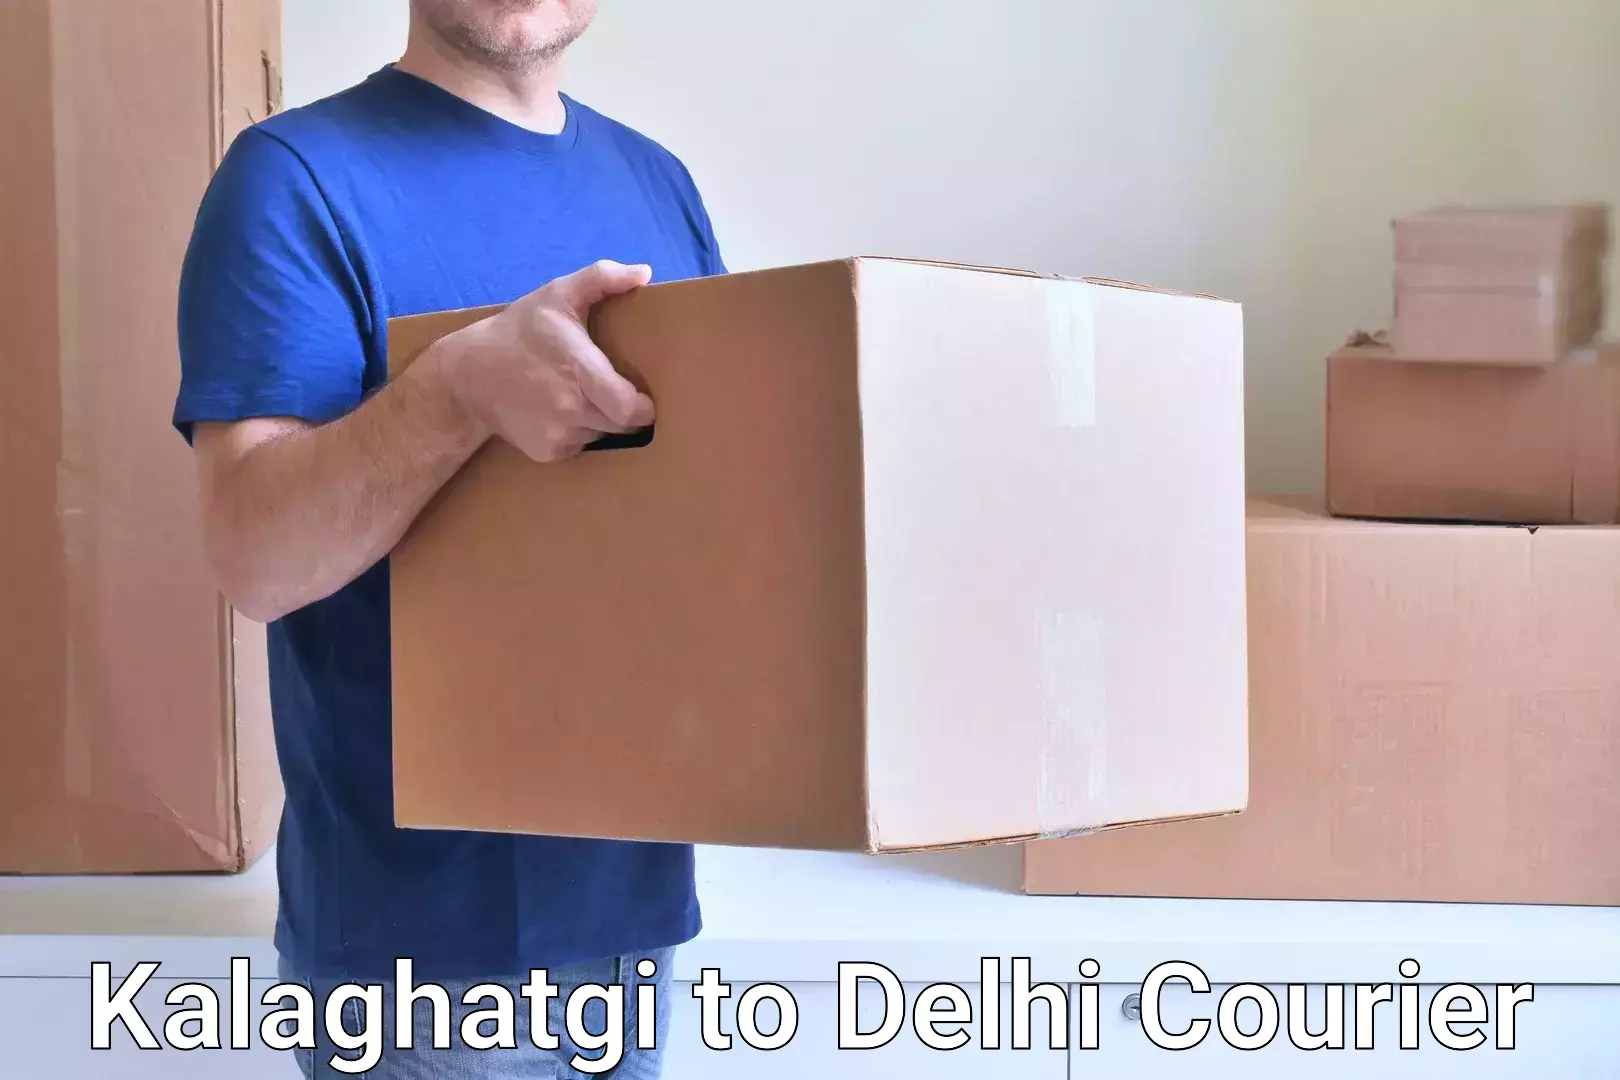 Courier insurance in Kalaghatgi to NCR